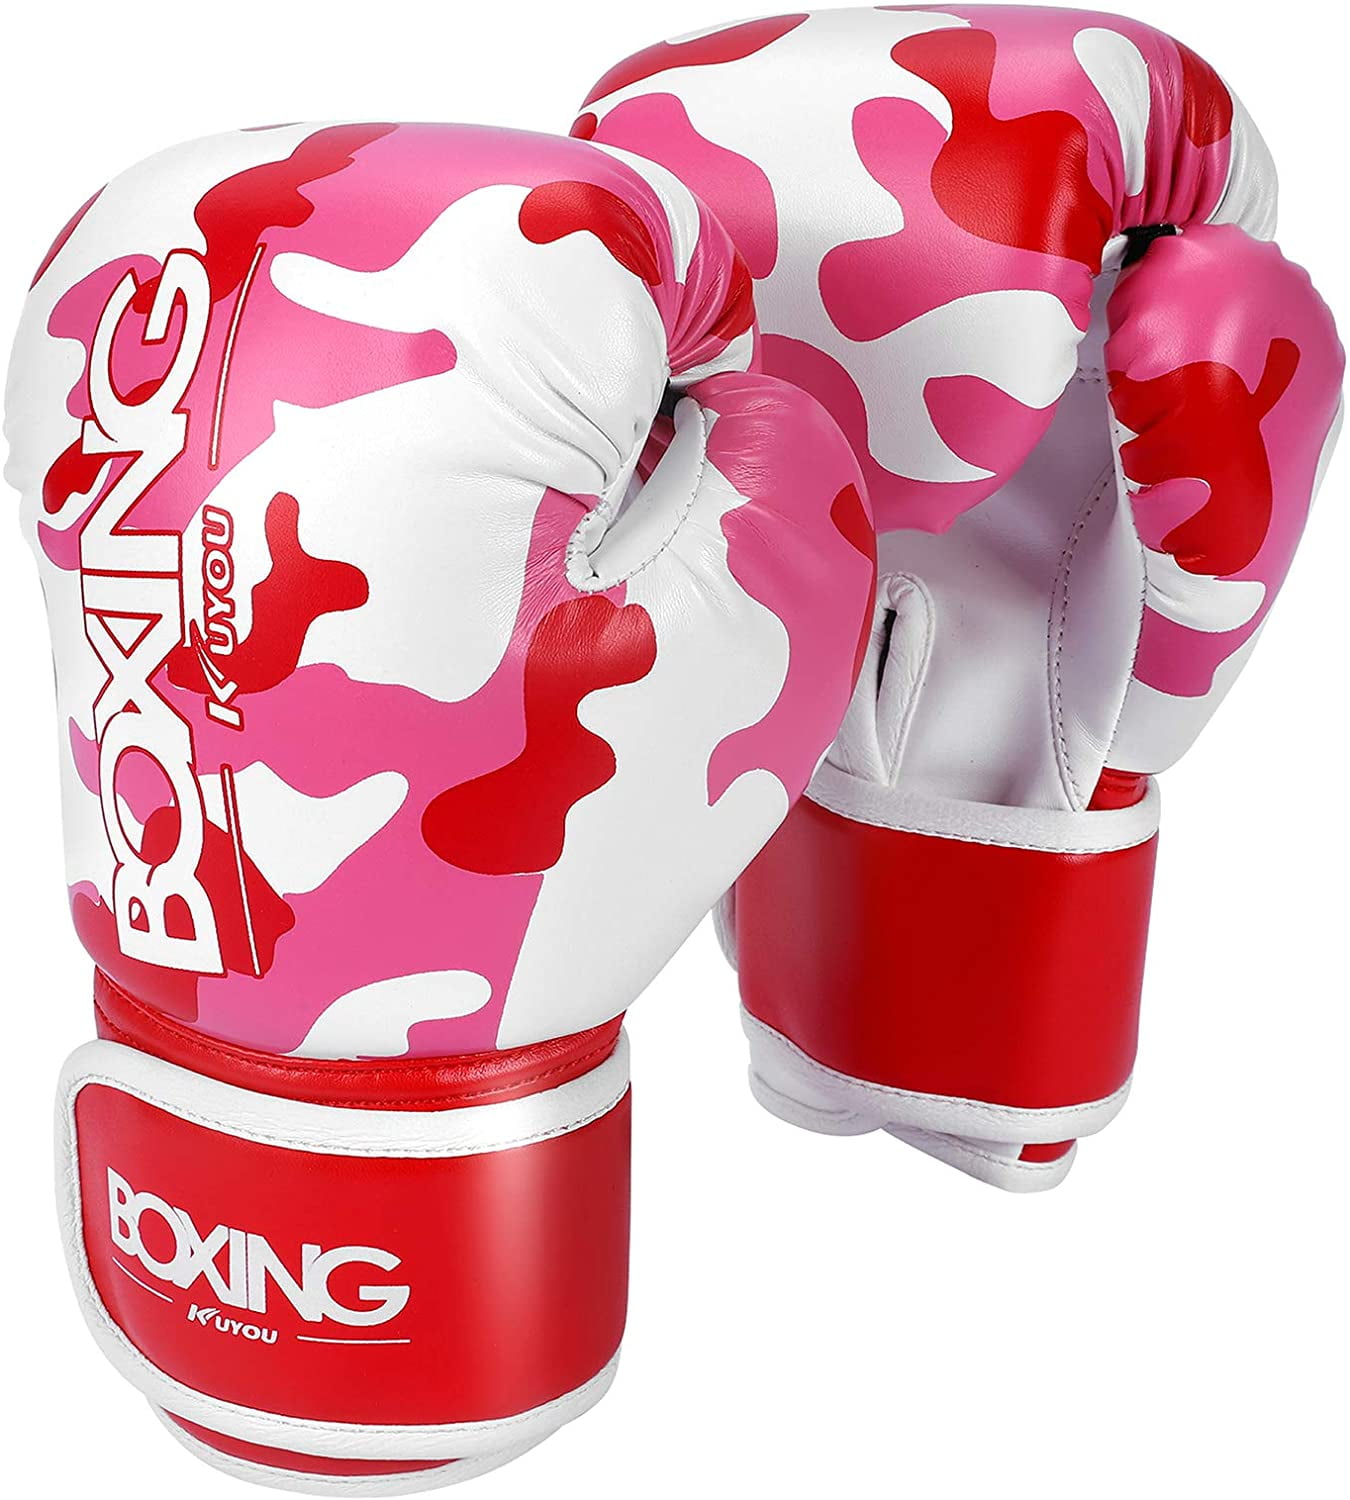 Pink Pro Box Kids Boxing Gloves PU Childs Play Toys 